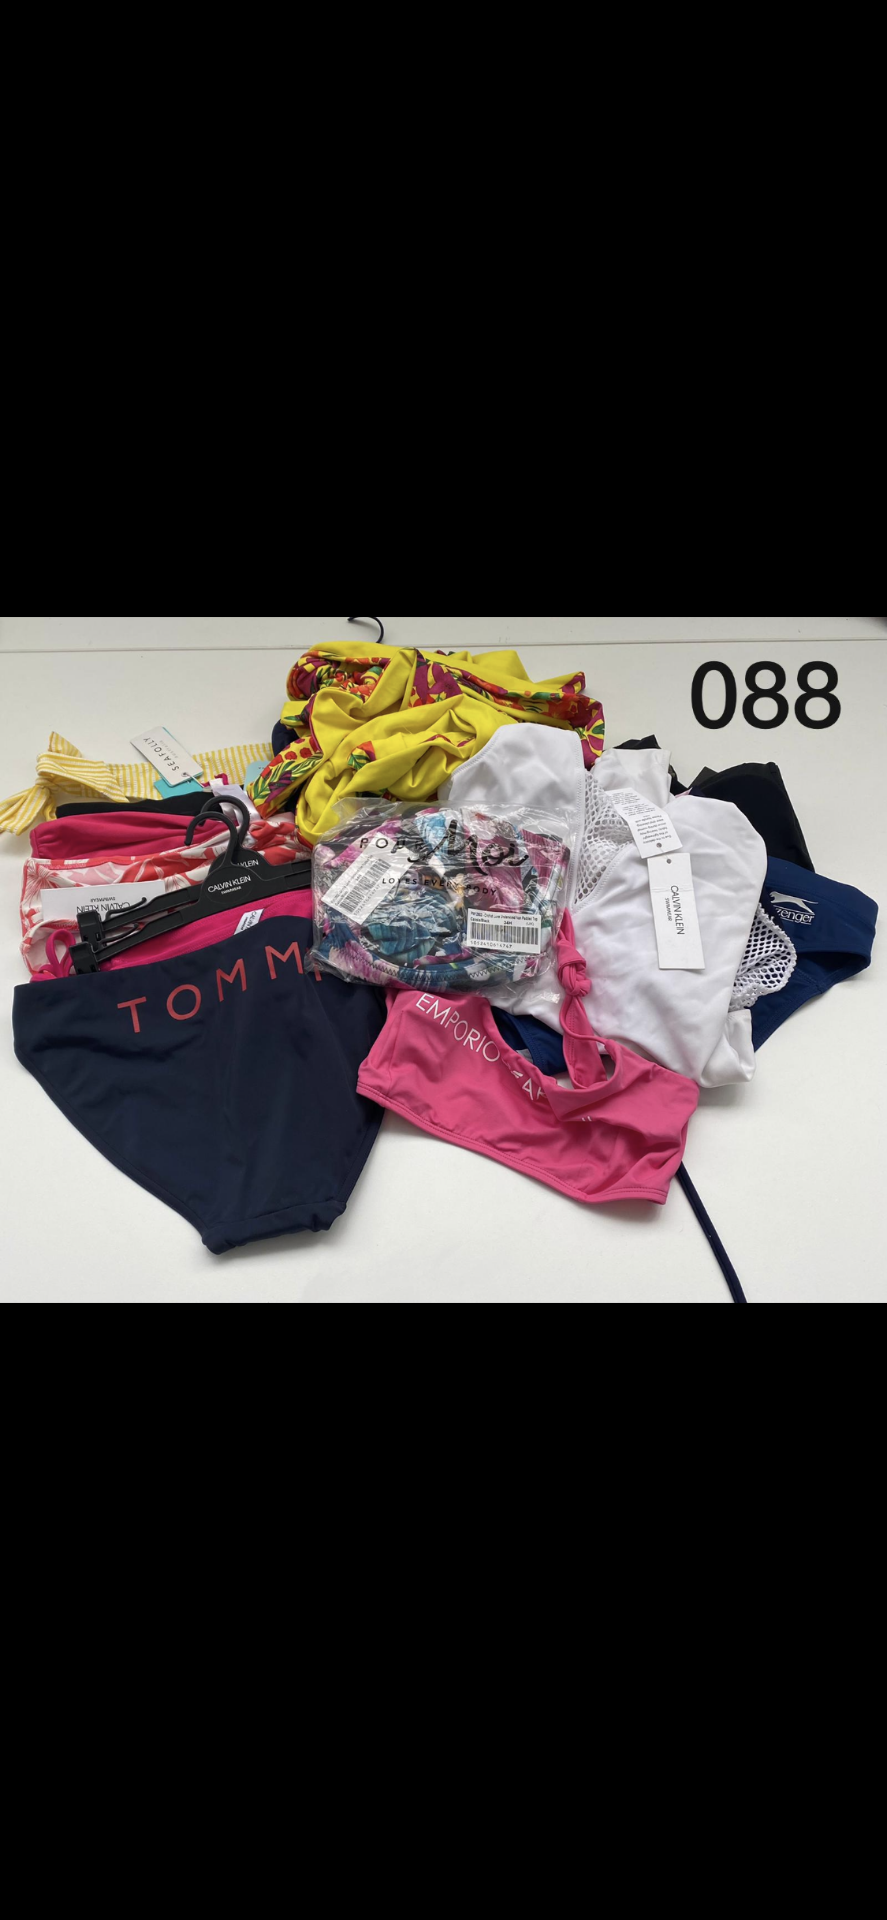 15 PIECE WOMENS SWIMWEAR LOT IN VARIOUS SIZES INCLUDING CALVIN KLEIN, ARMANI AND TOMMY HILFIGER